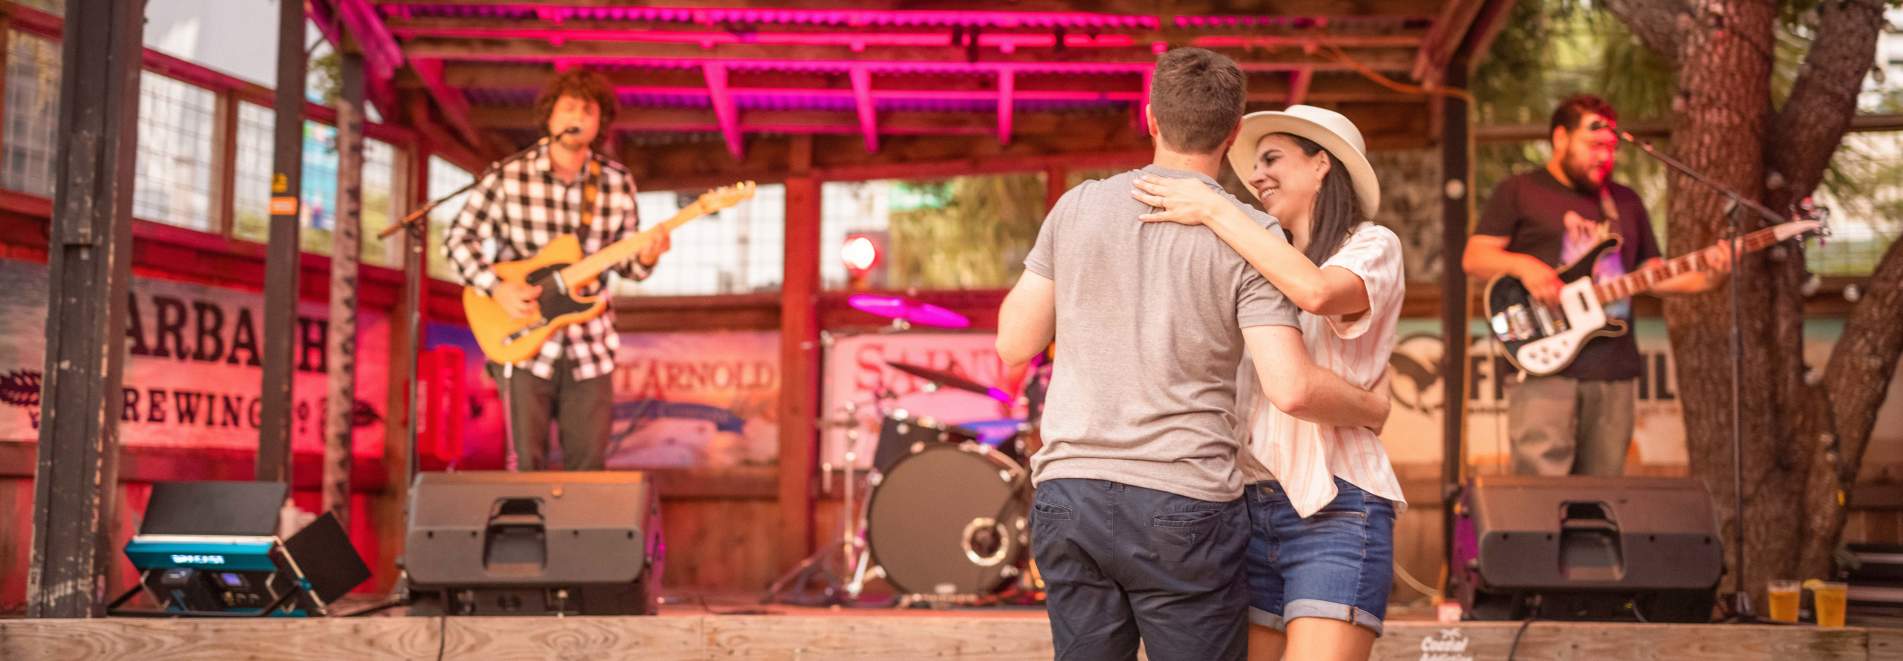 Country band and dancing Lifestyle Photography from K2 Productions